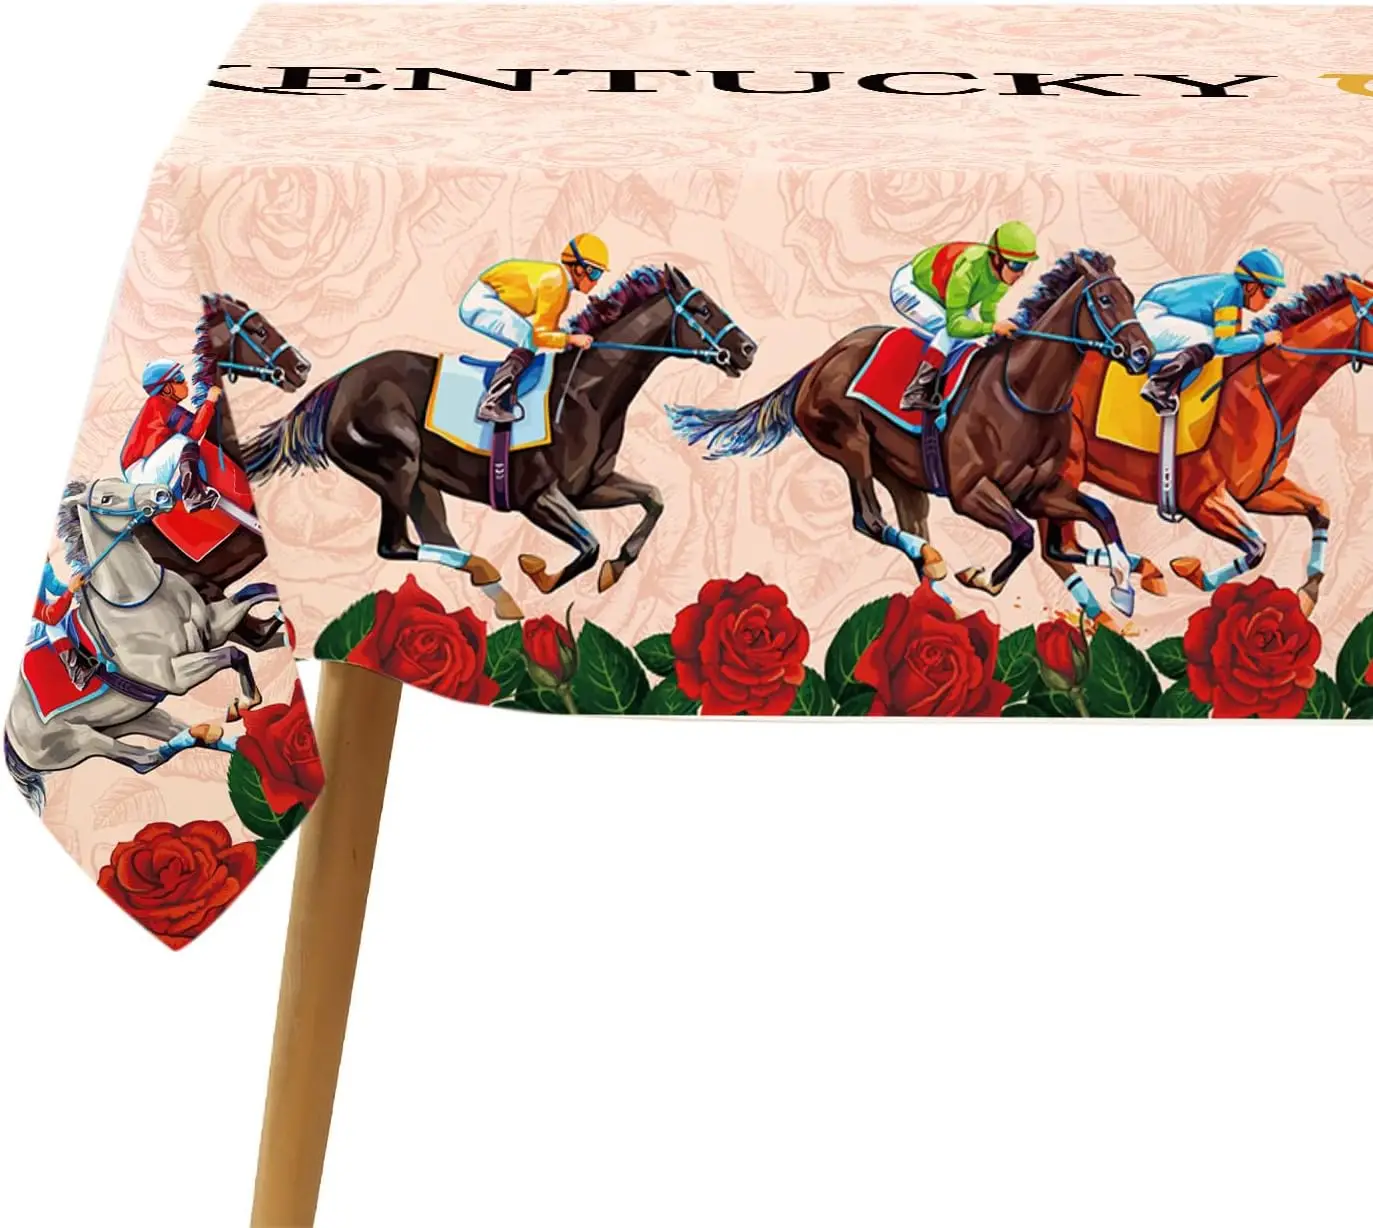 Kentucky Derby Tablecloth Waterproof Horse Racing Party Decor Run for The Roses Table Cloths for Kitchen Dining Room Table Decor